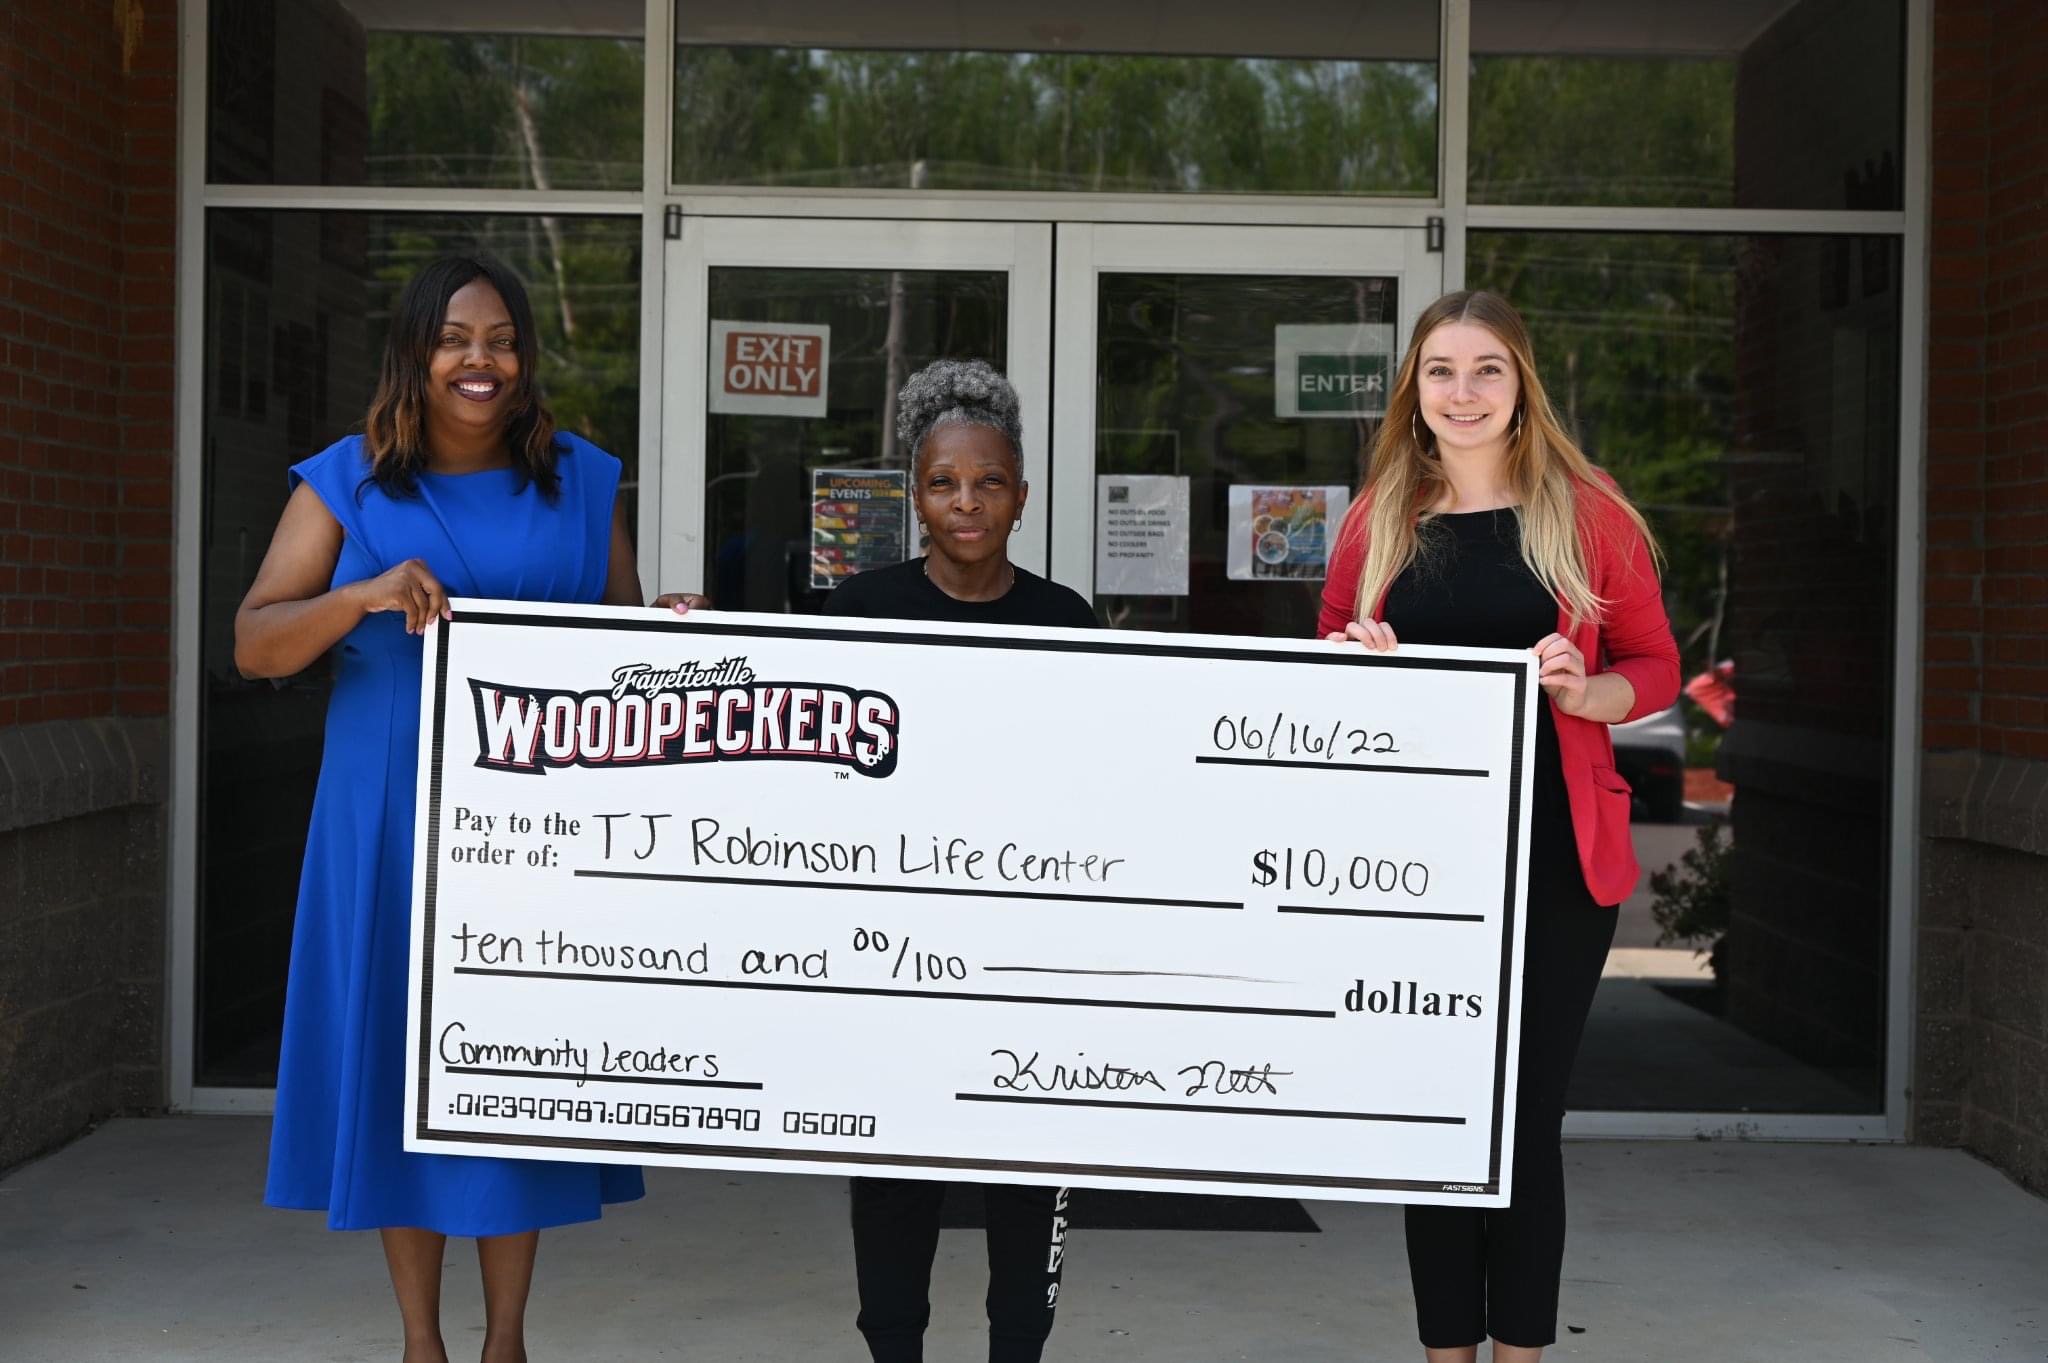 Woodpeckers Announce Partnership With TJ Robinson Life Center